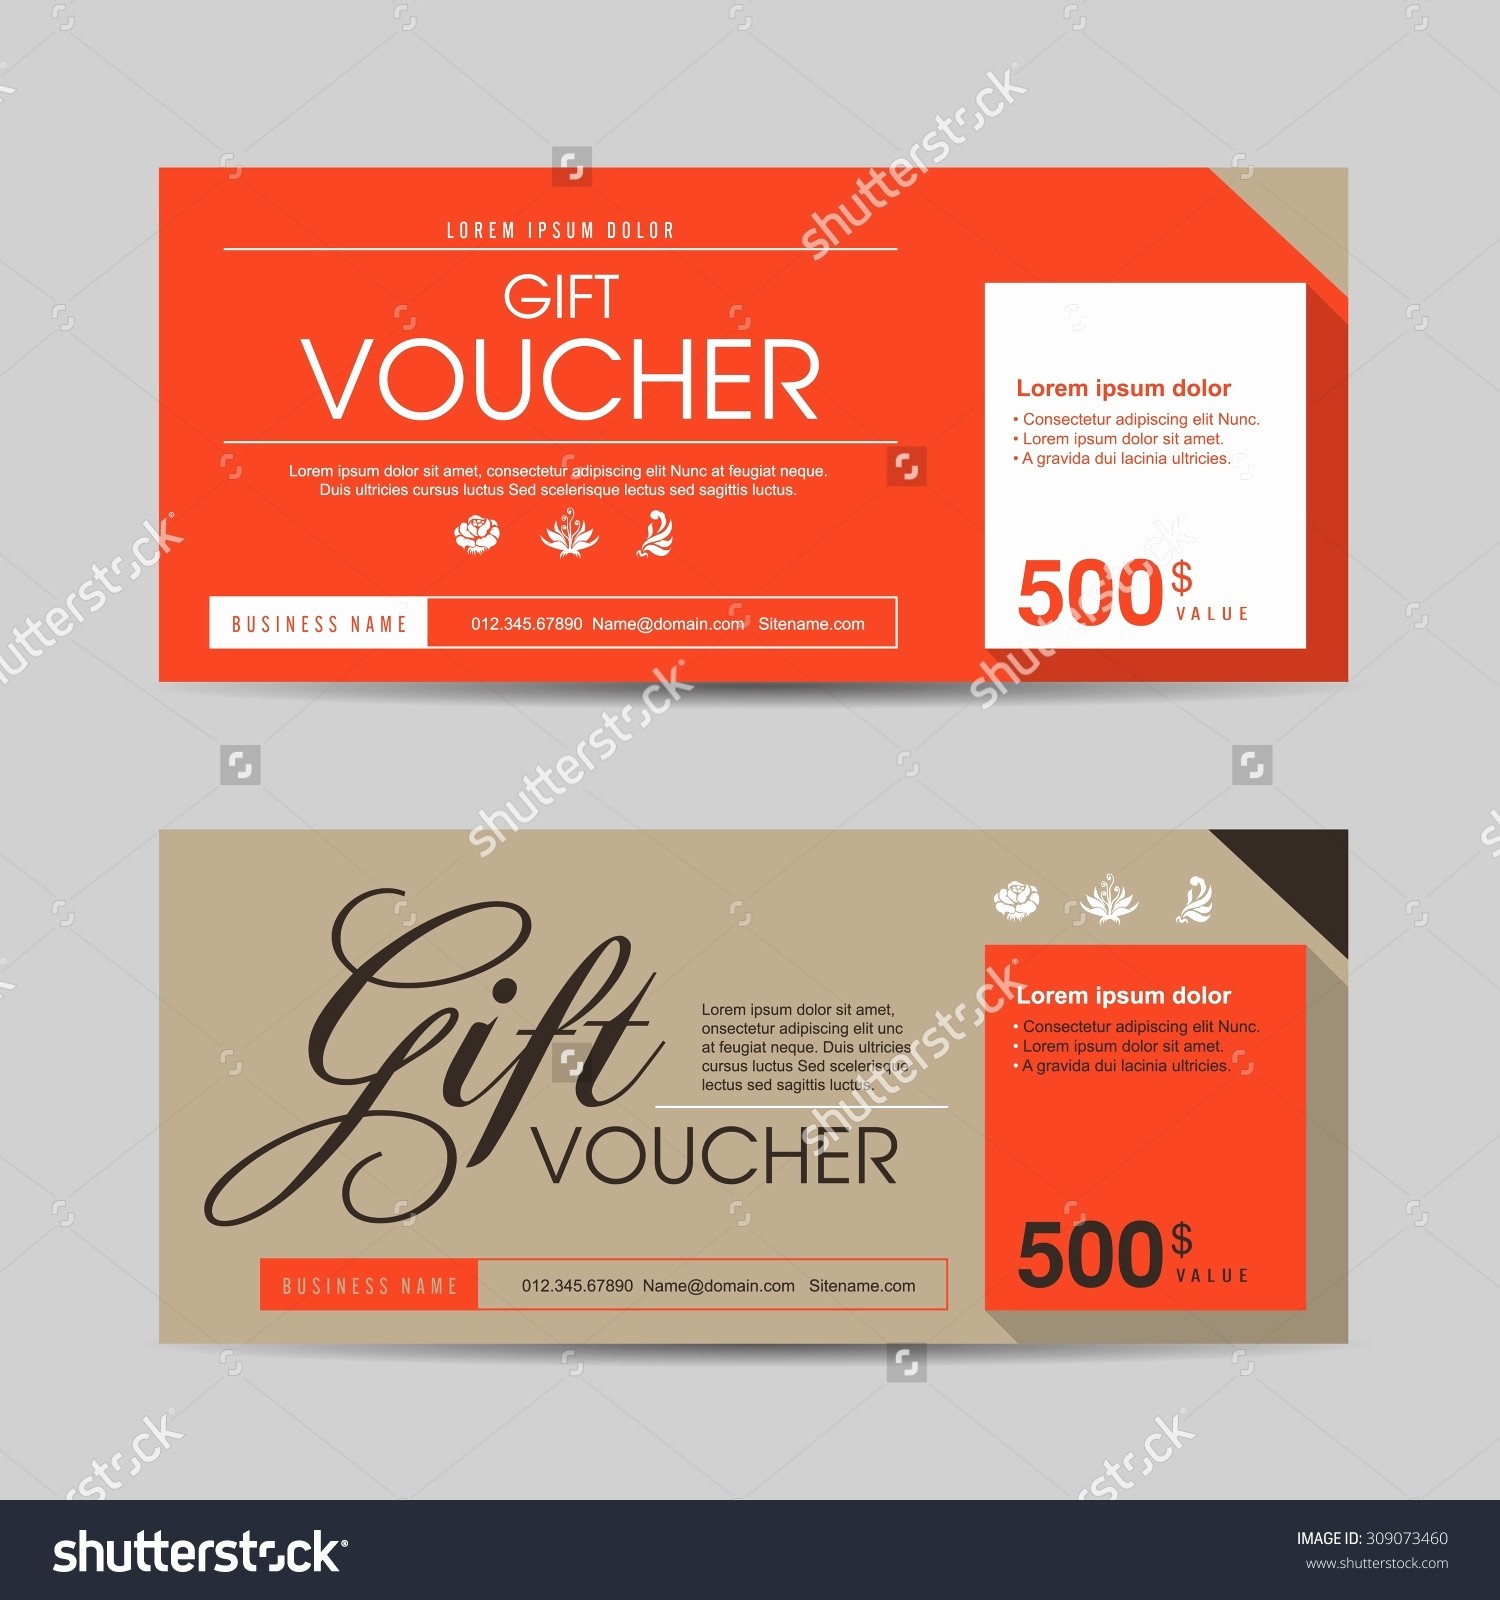 50 Luxury Auto Detailing Gift Certificate Template DOCUMENTS IDEAS